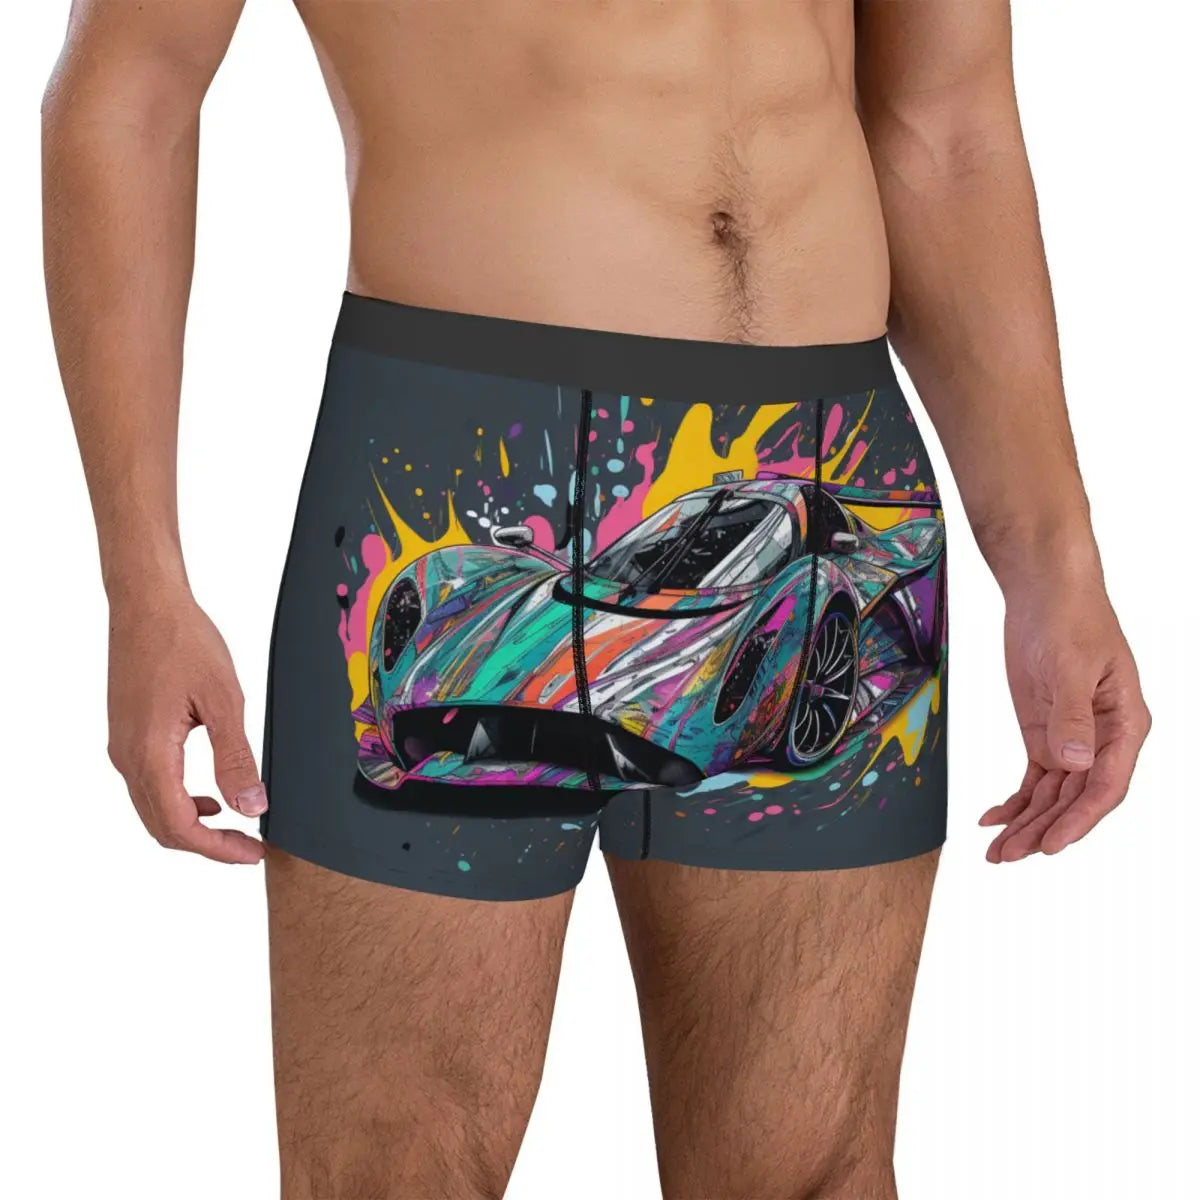 Dazzling Sports Car Underwear Grafitti Psychadelic Pouch Quality Boxershorts Sublimation Shorts Briefs Cute Males Underpants